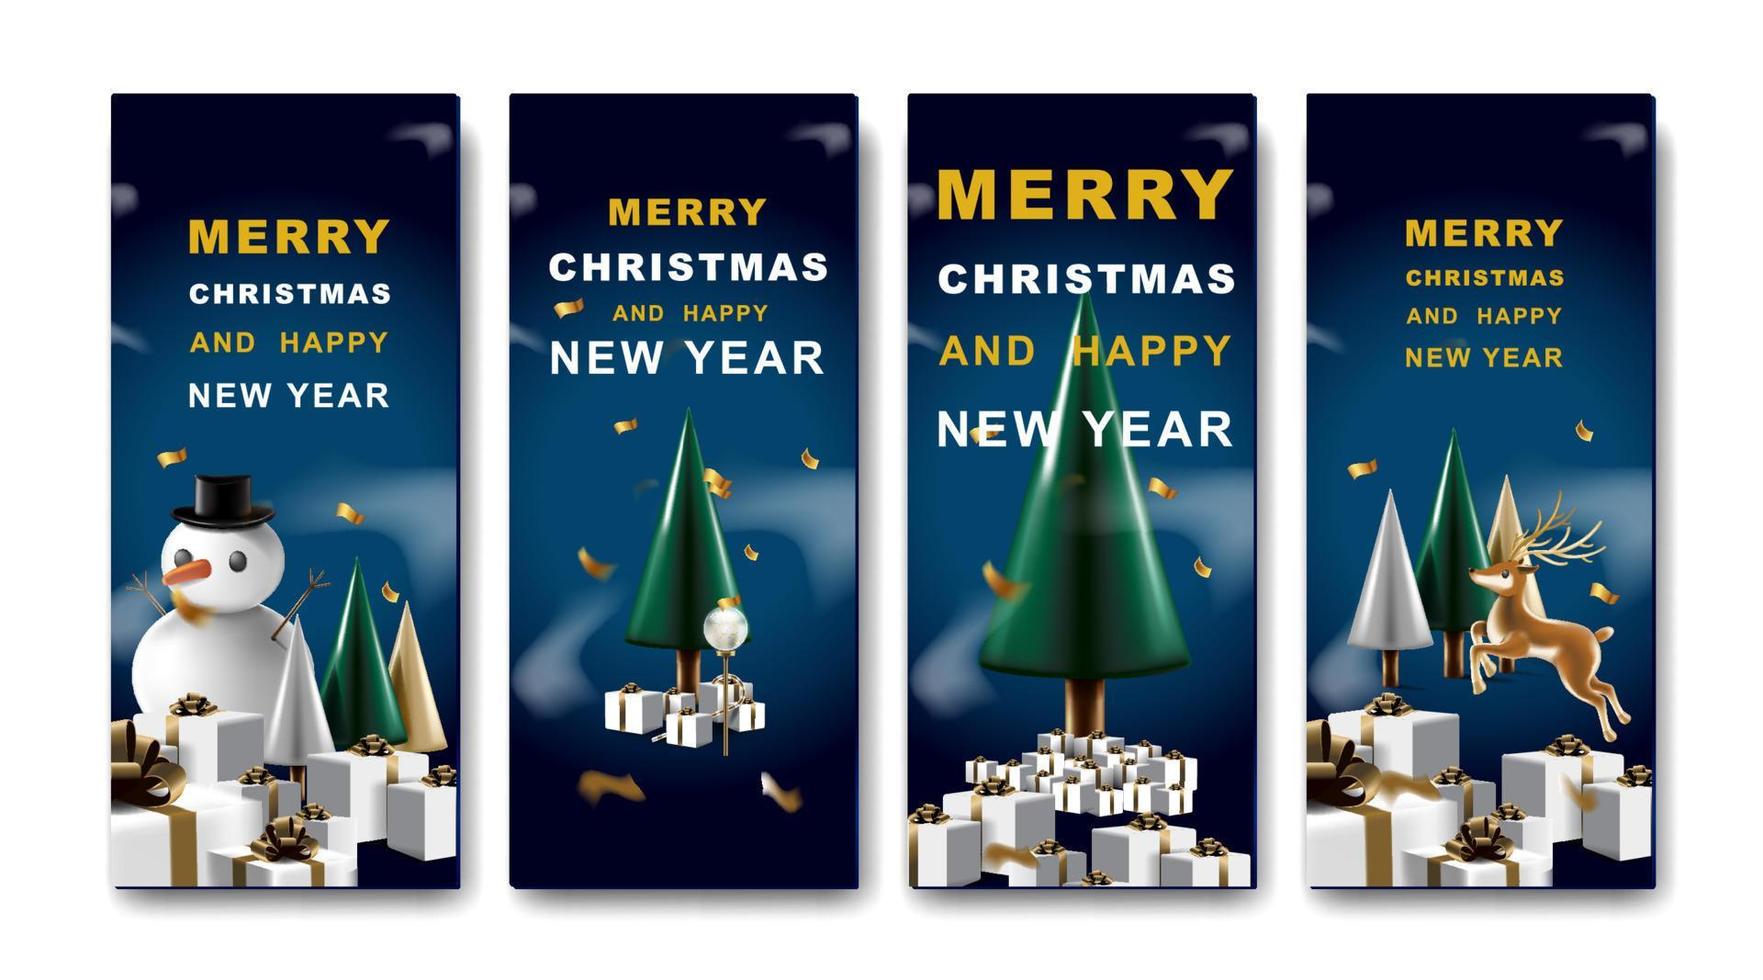 Merry Christmas and happy new year banner with decoration for christmas festival. vector